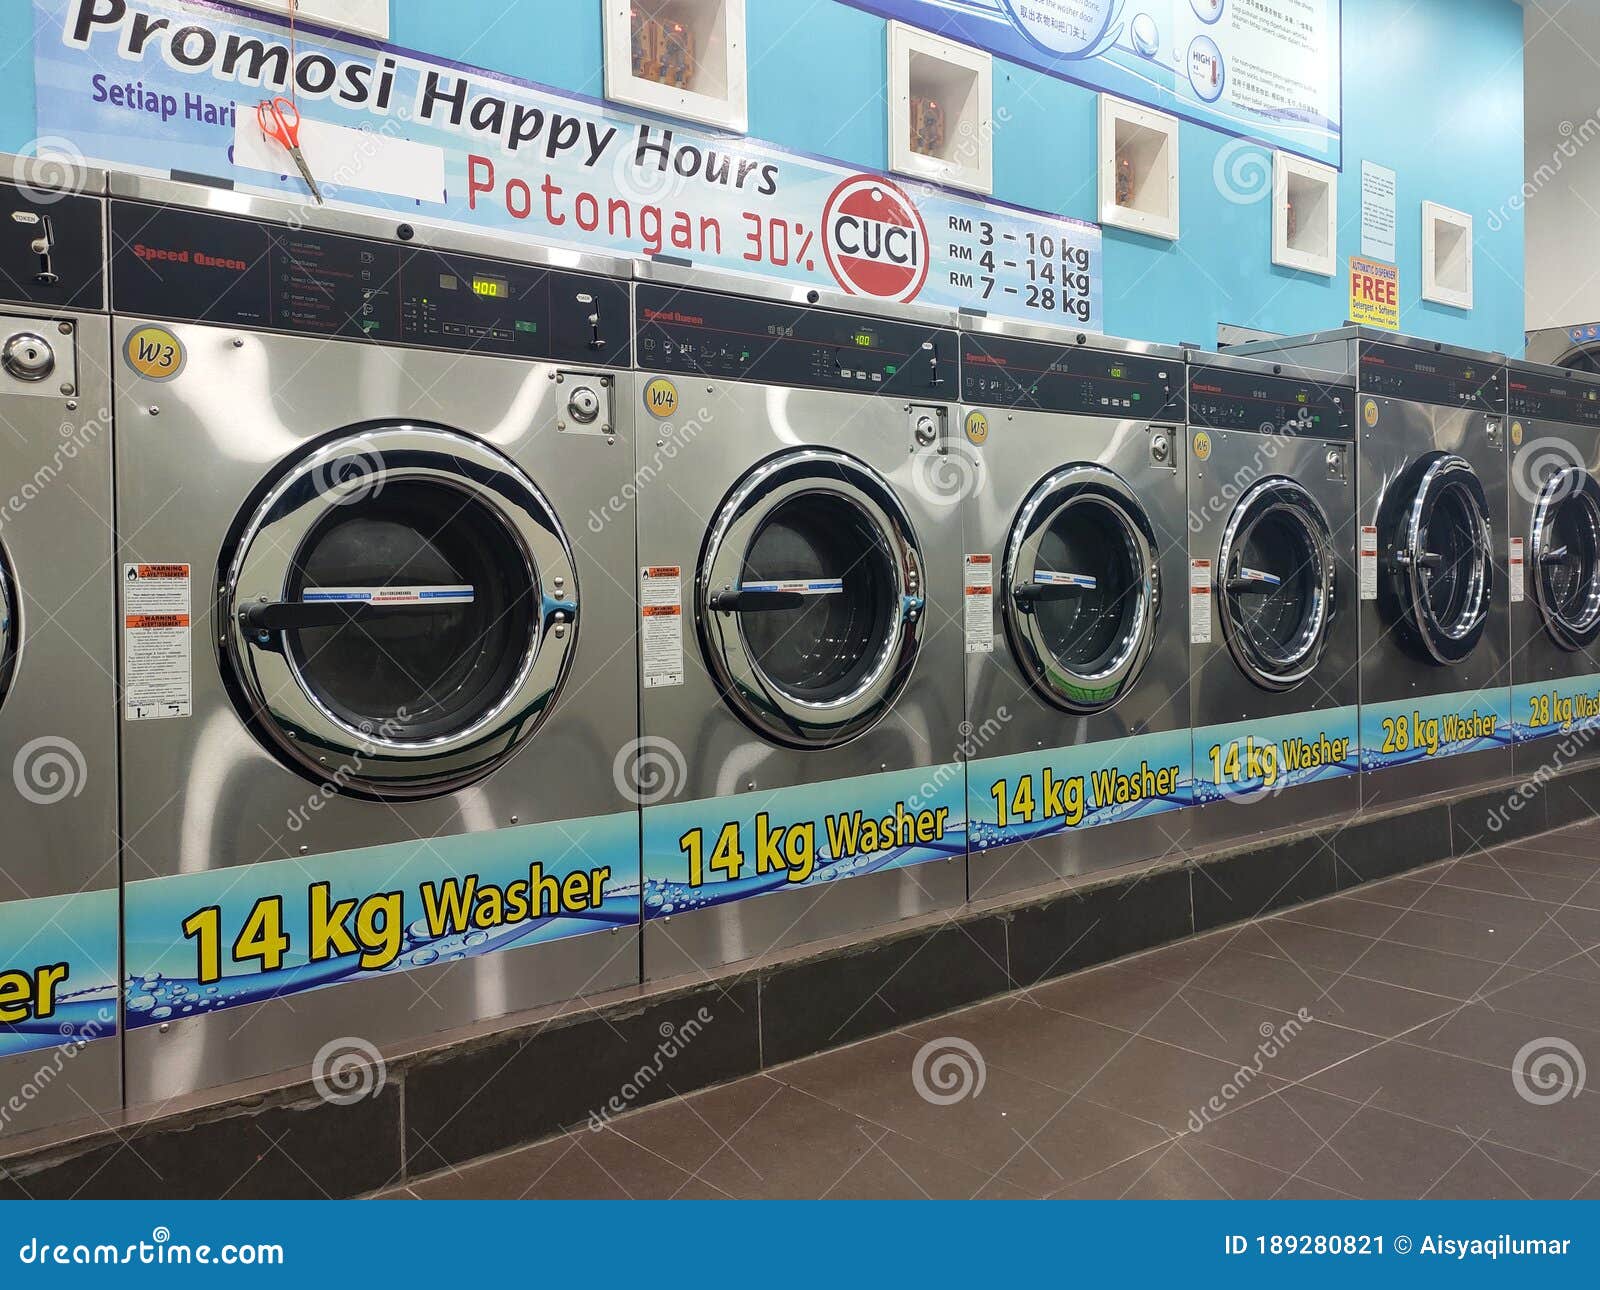 laundry-machines-outlet-provides-self-service-laundry-drying-machines-open-hours-kuala-lumpur-malaysia-march-laundry-189280821.jpg